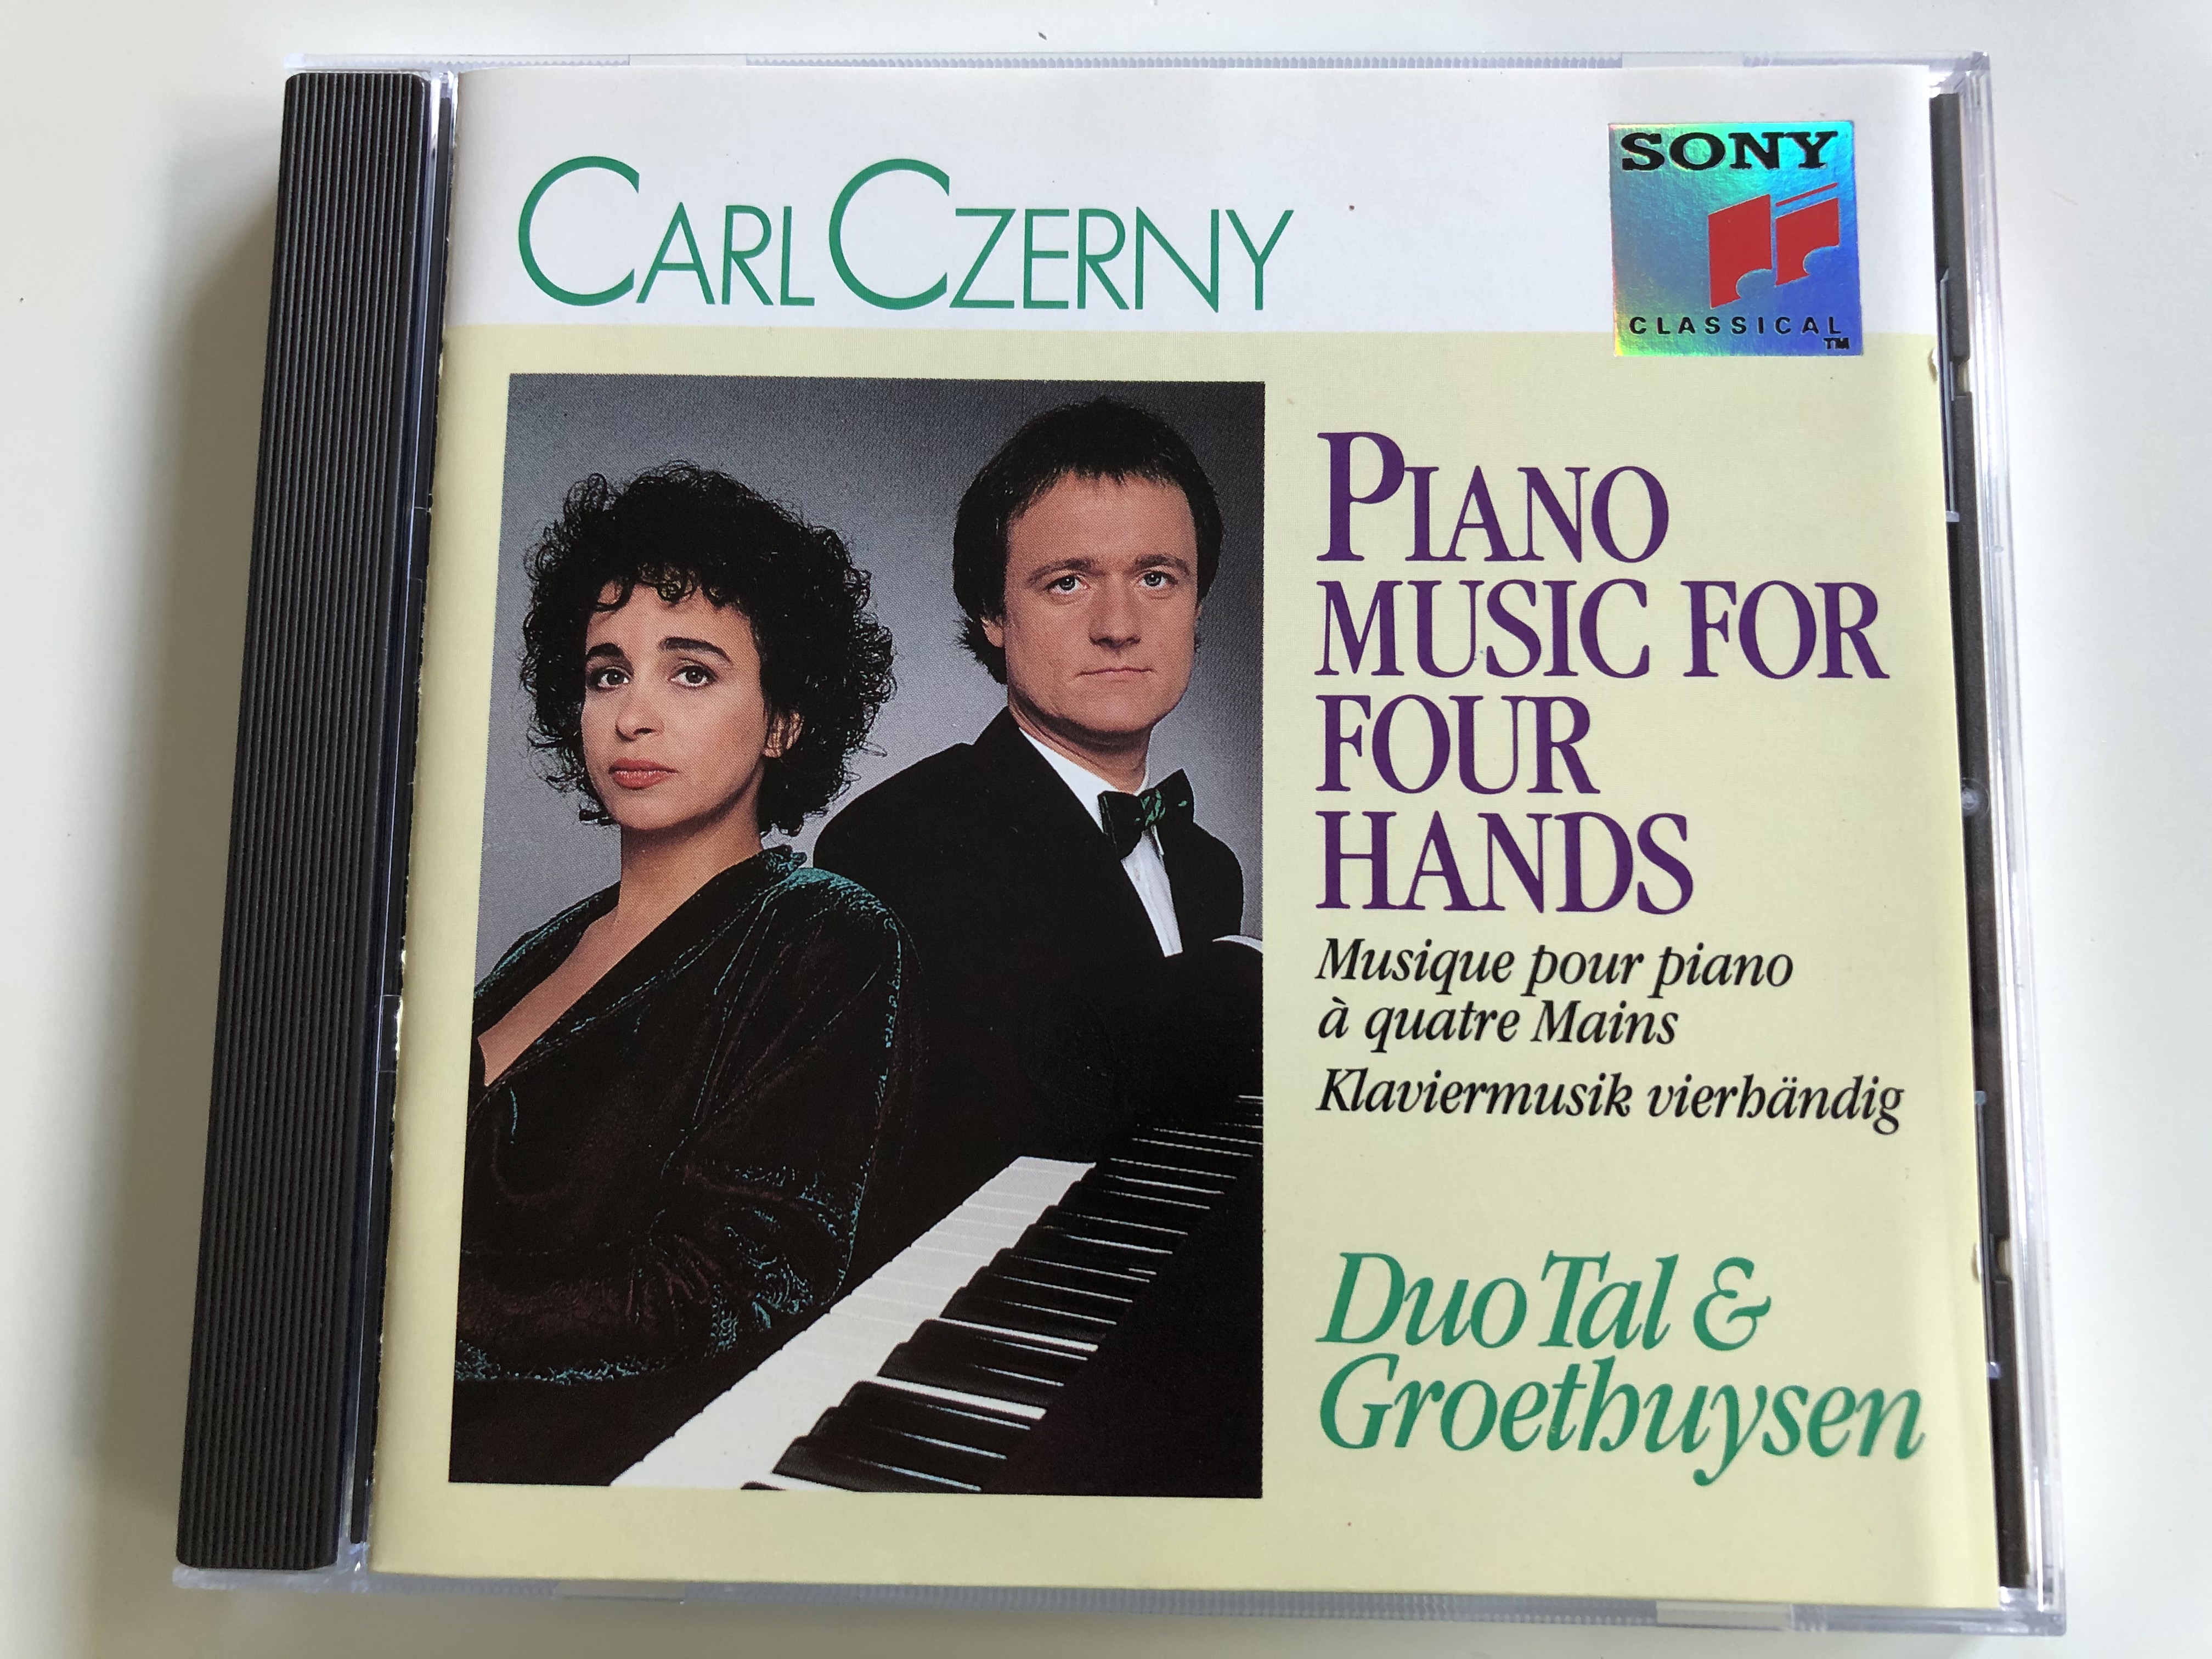 carl-czerny-piano-music-for-four-hands-duo-tal-groethuysen-sony-classical-audio-cd-1991-sk-45936-1-.jpg